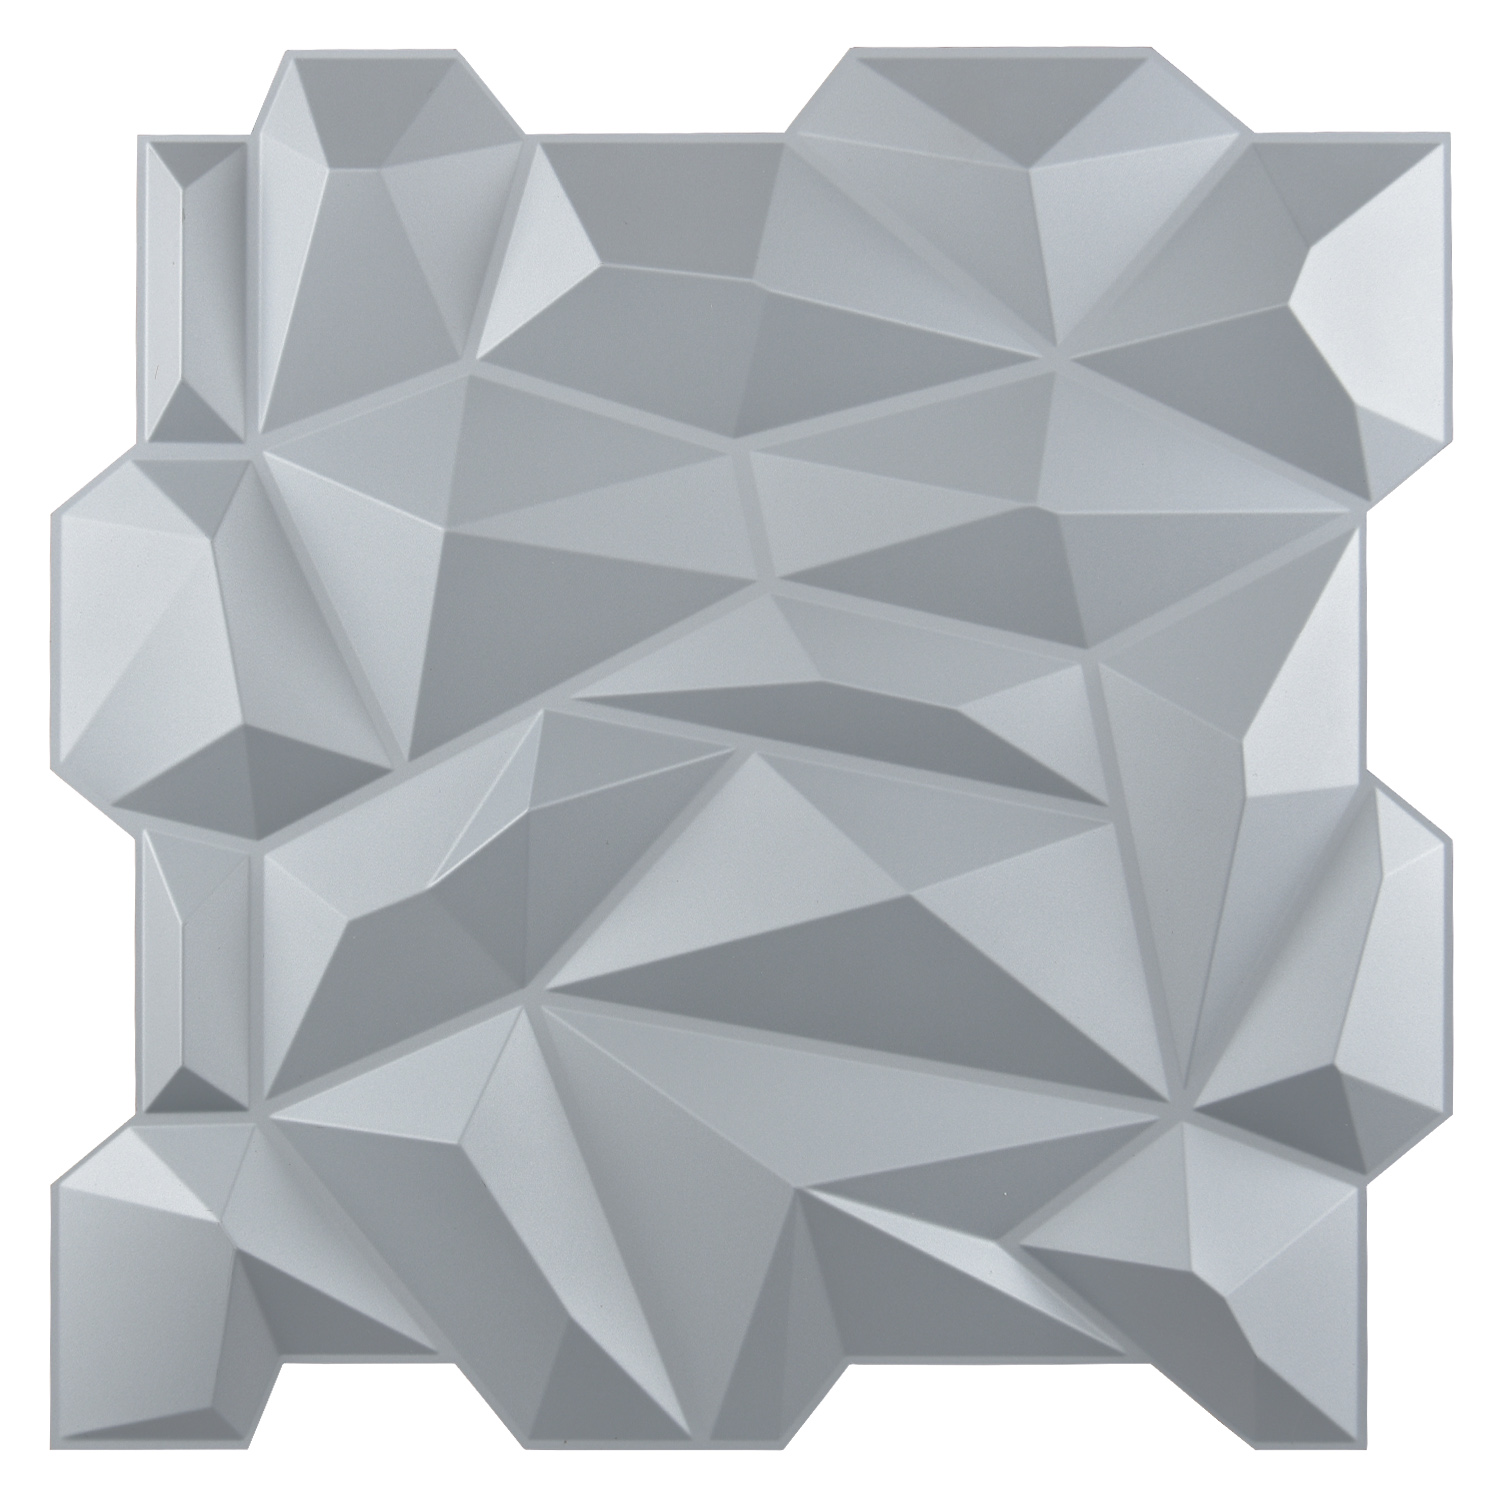 A10047GY  PVC 3D Diamond Wall Panel Jagged Matching-Matt White, for Residential and Commercial Interior Décor